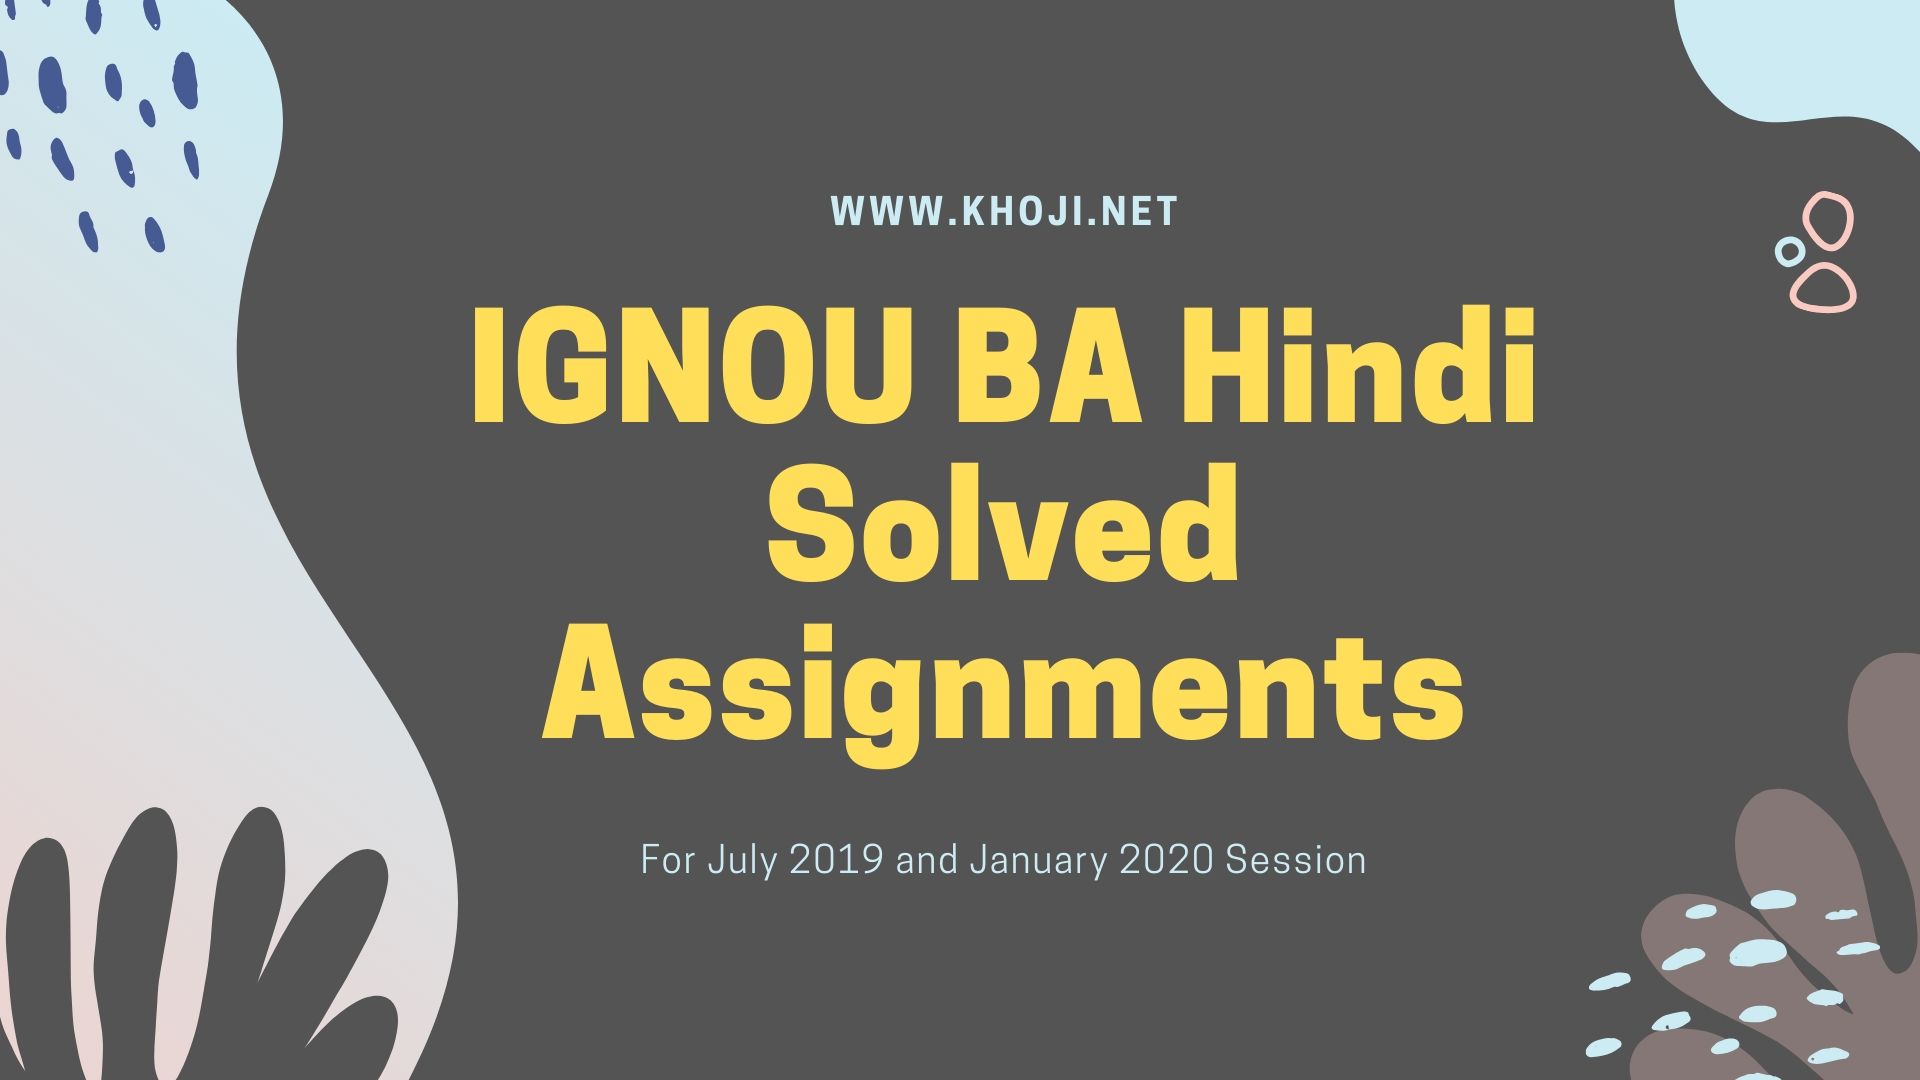 IGNOU BA Hindi Solved Assignments 2019-2020